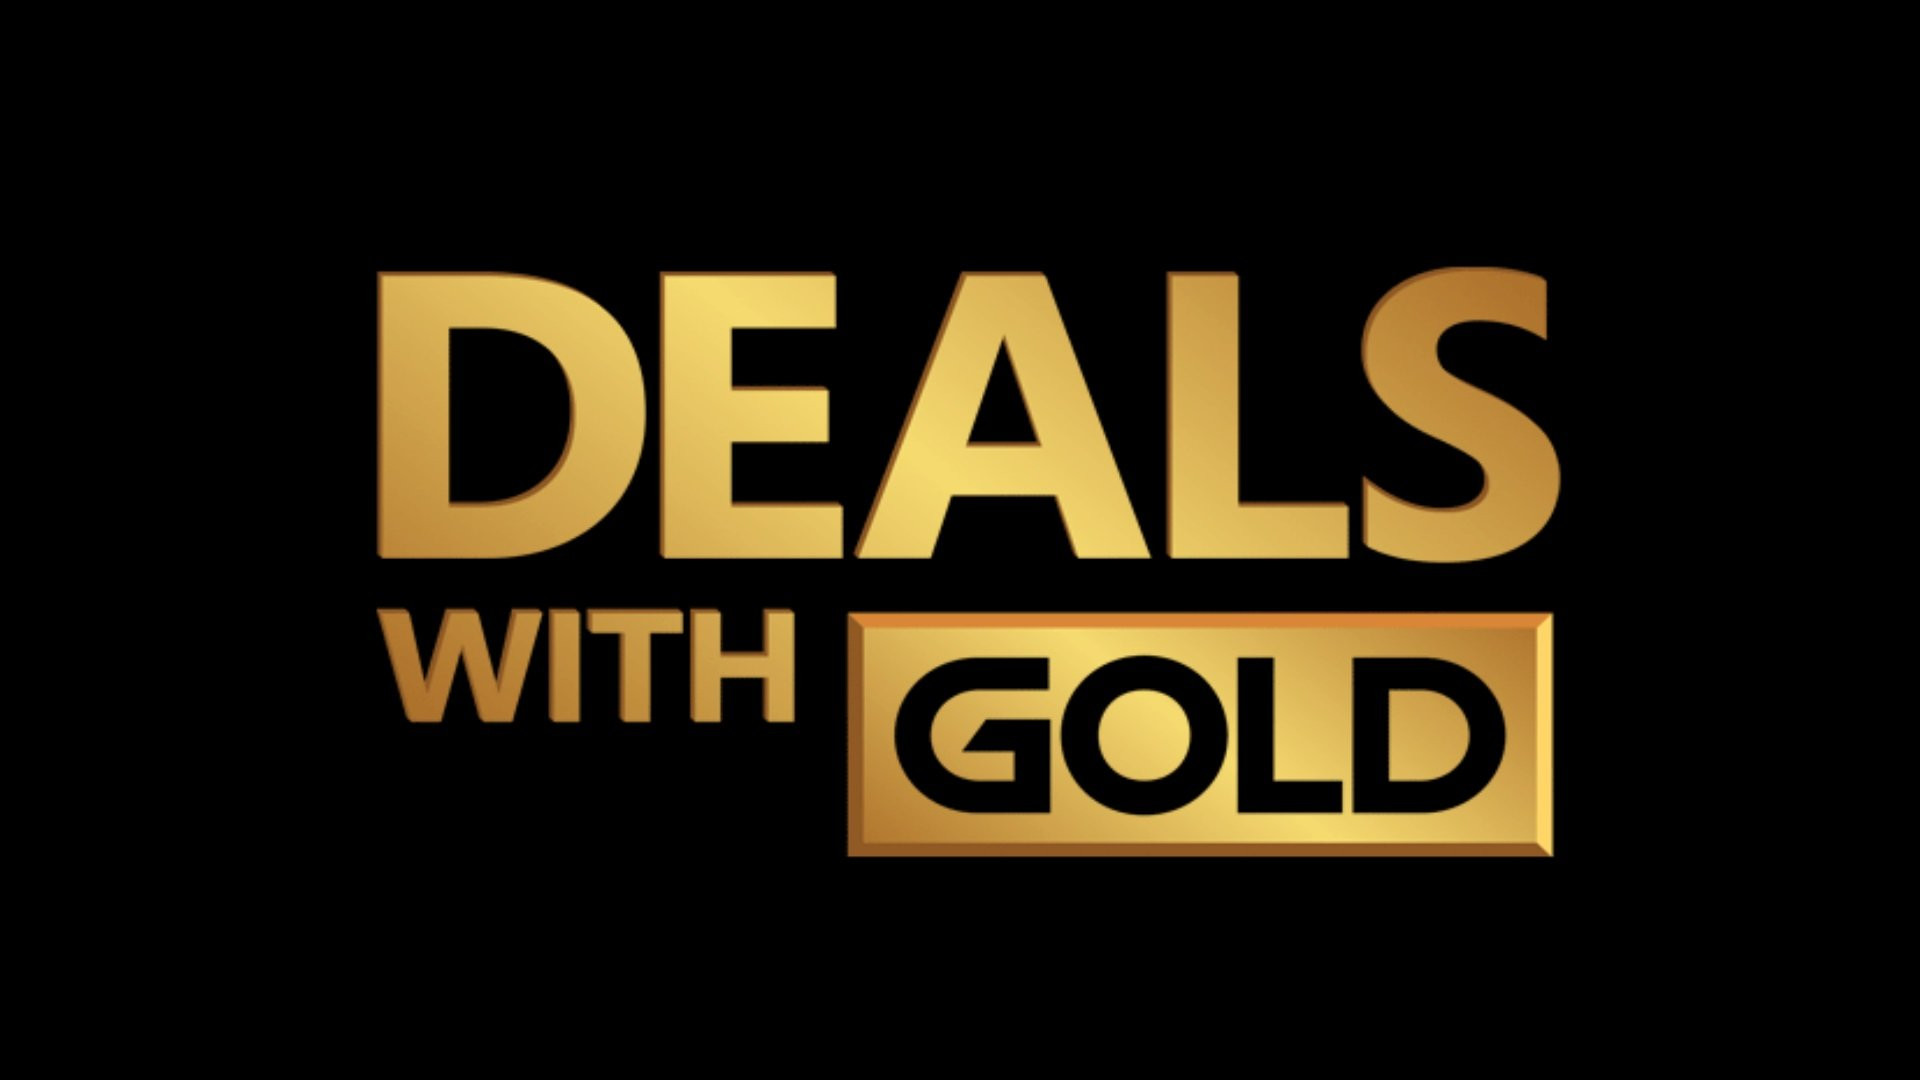 Deals with Gold semaine 19